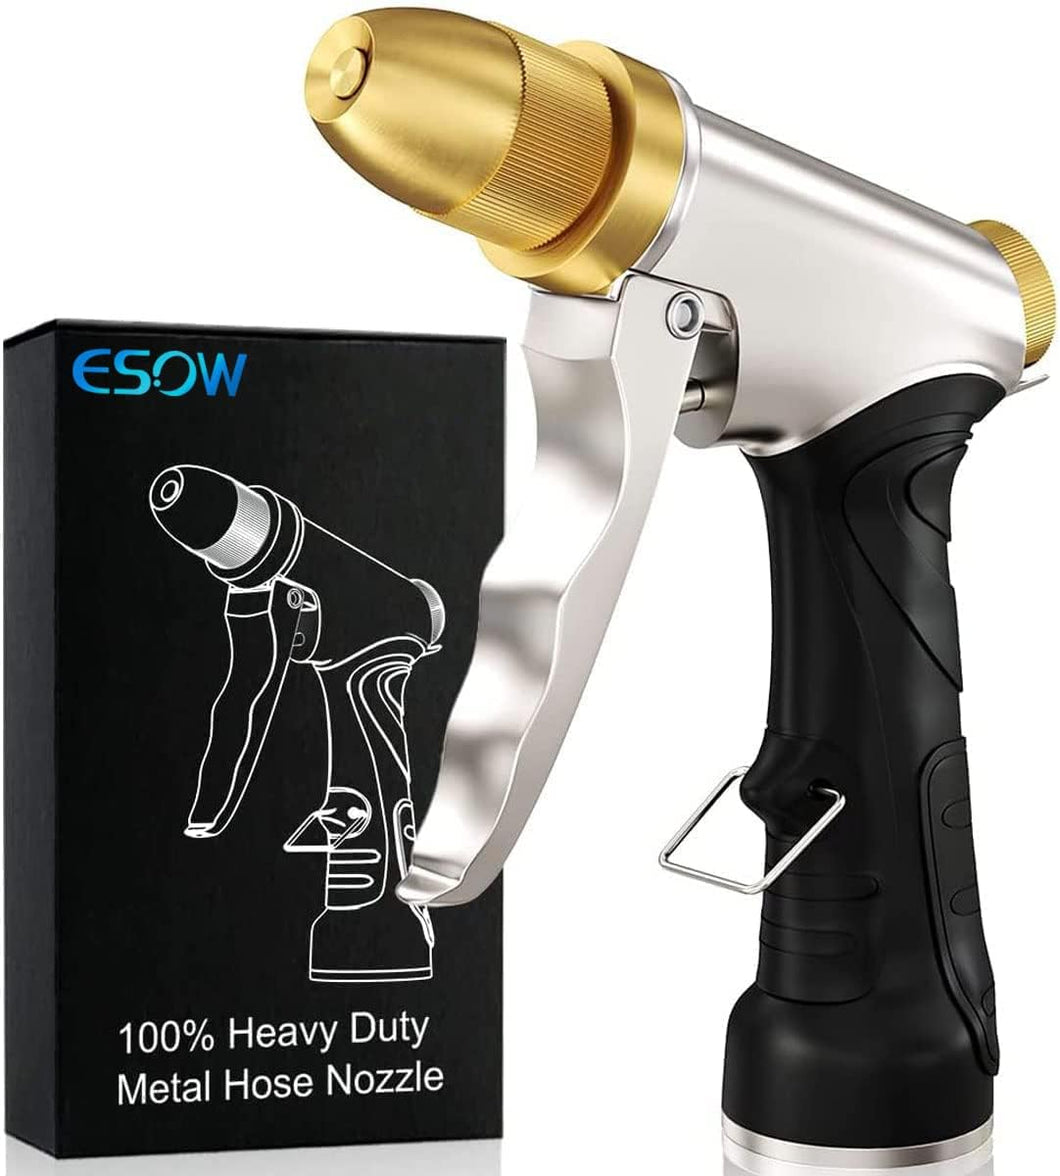 ESOW Garden Hose Nozzle 100% Heavy Duty Metal, Full Brass Nozzle & ABS Non-slip Ergonomic Grip, 4 Watering Patterns, High Pressure Metal Spray Gun for Watering Plants, Car Wash and Showering Dog